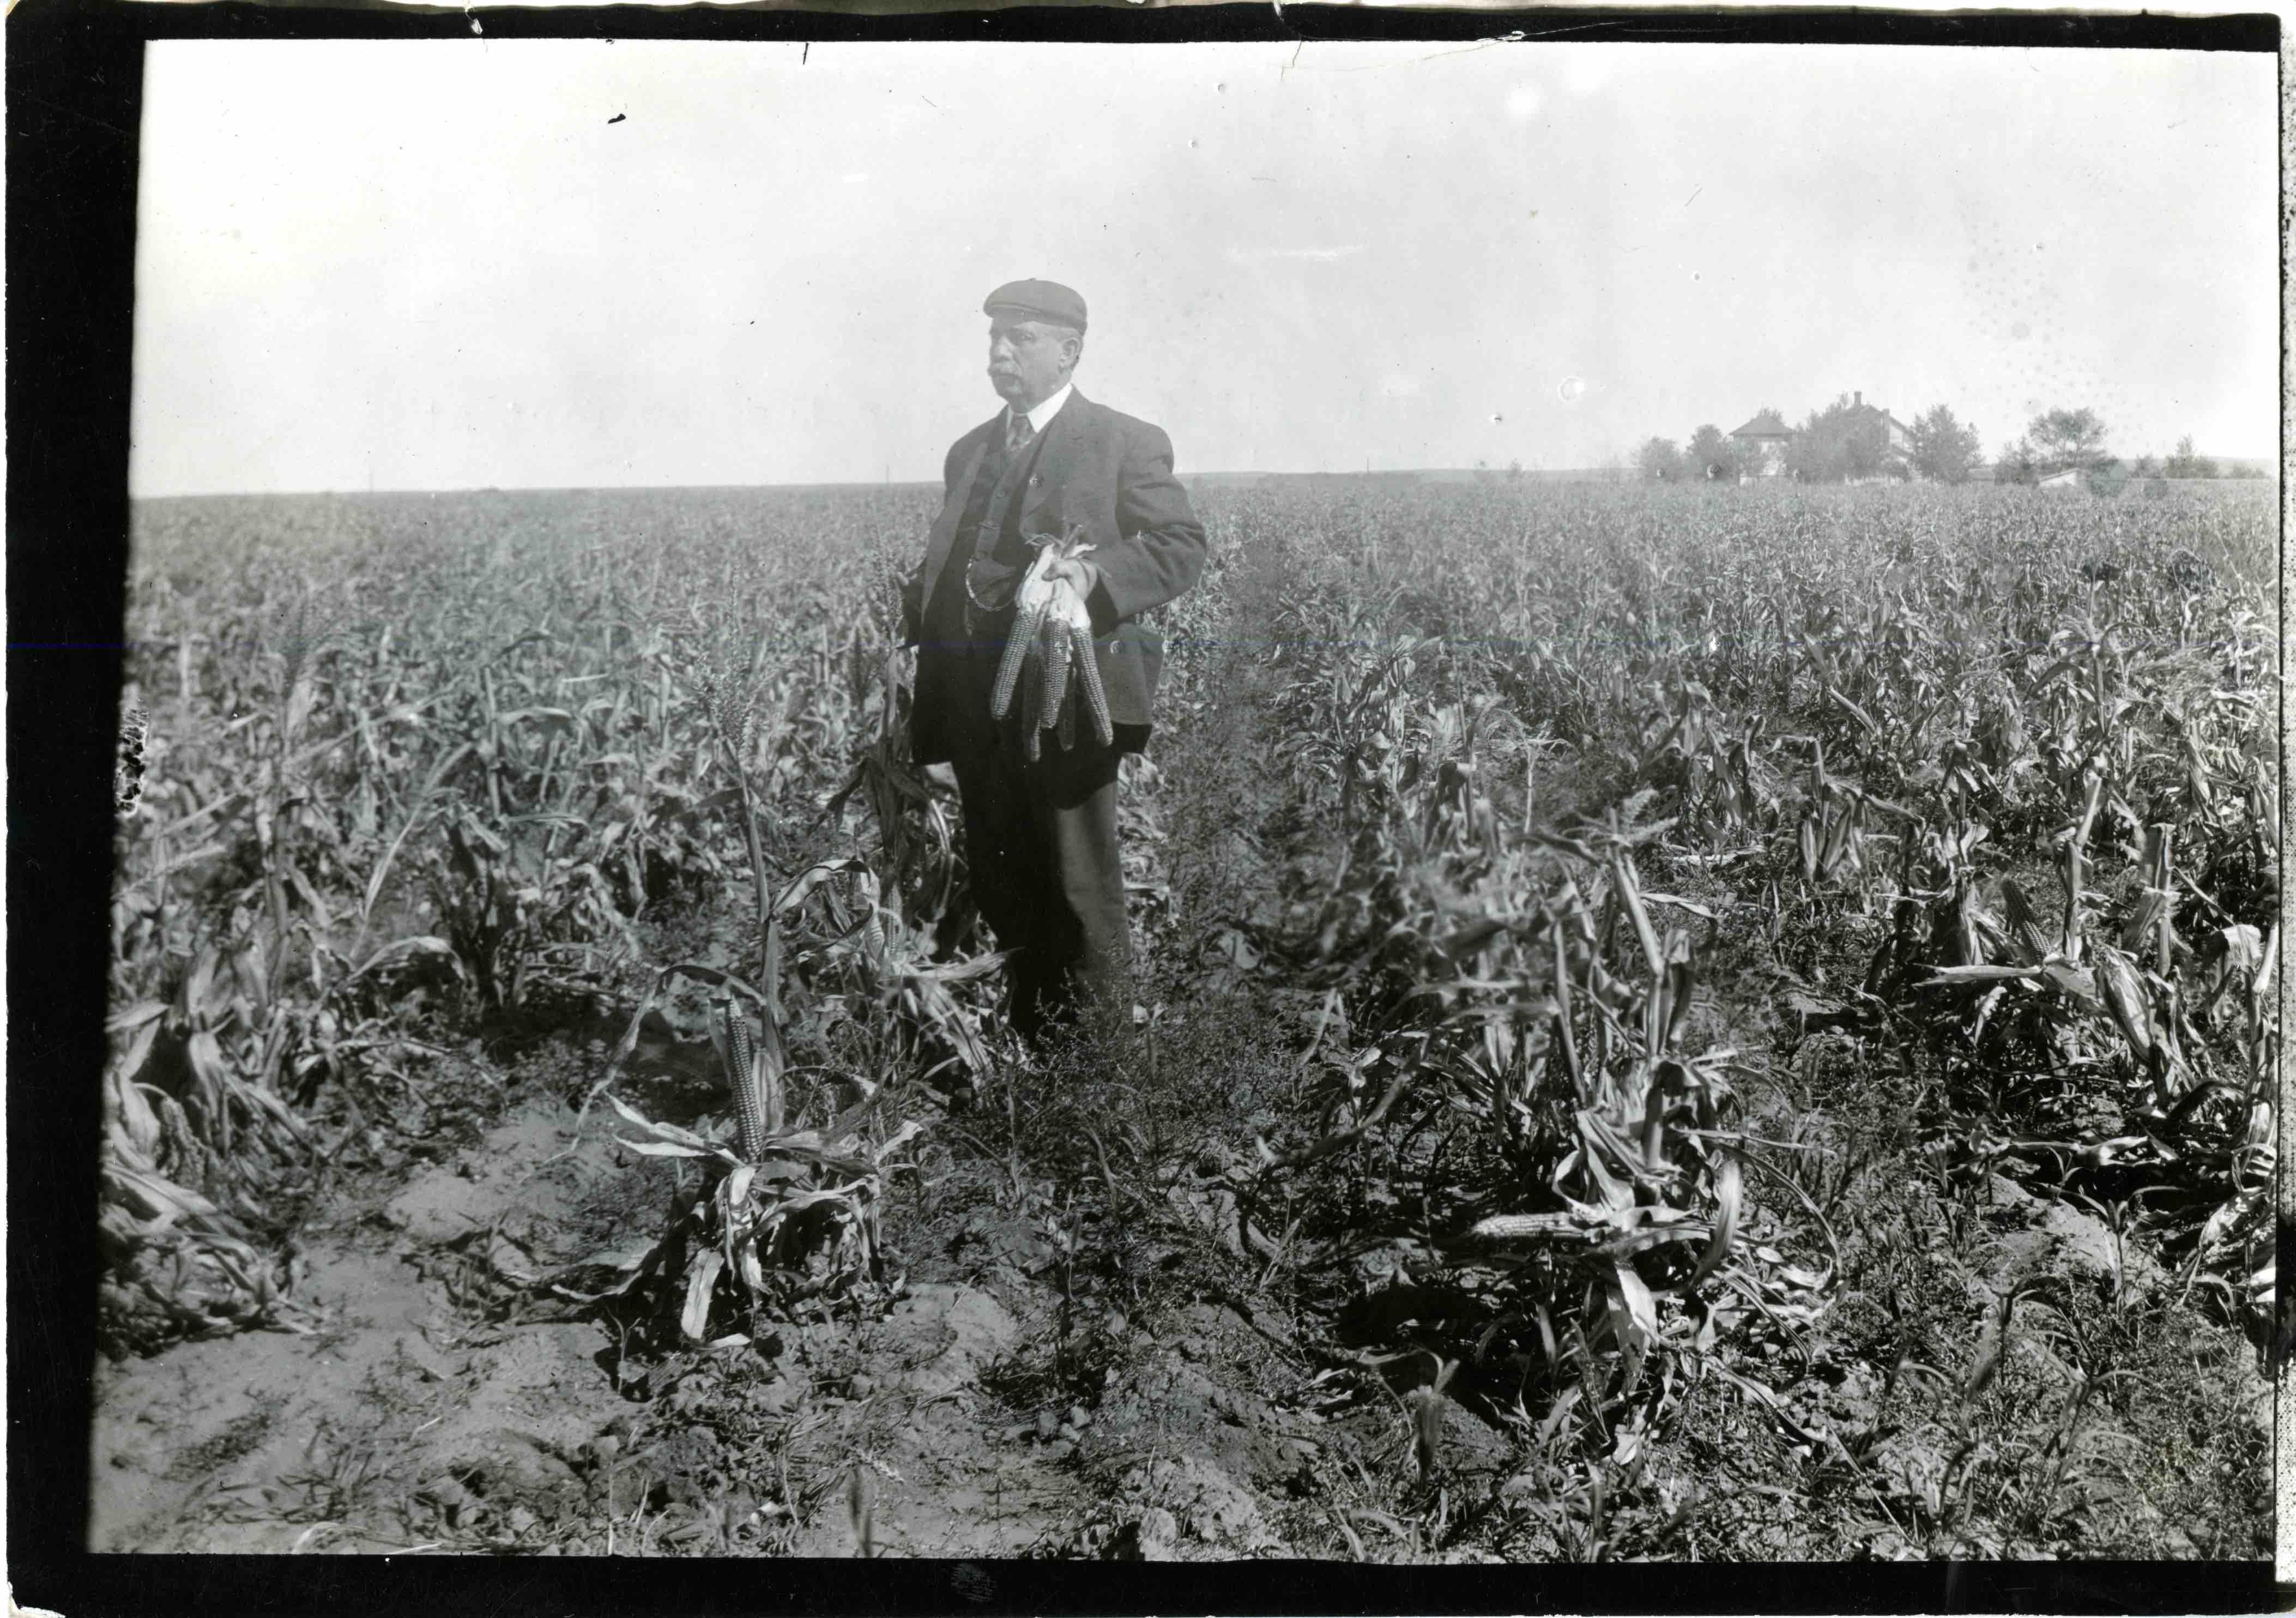 A black and white photo of a man standing in a field of corn, holding an ear of corn in his hands